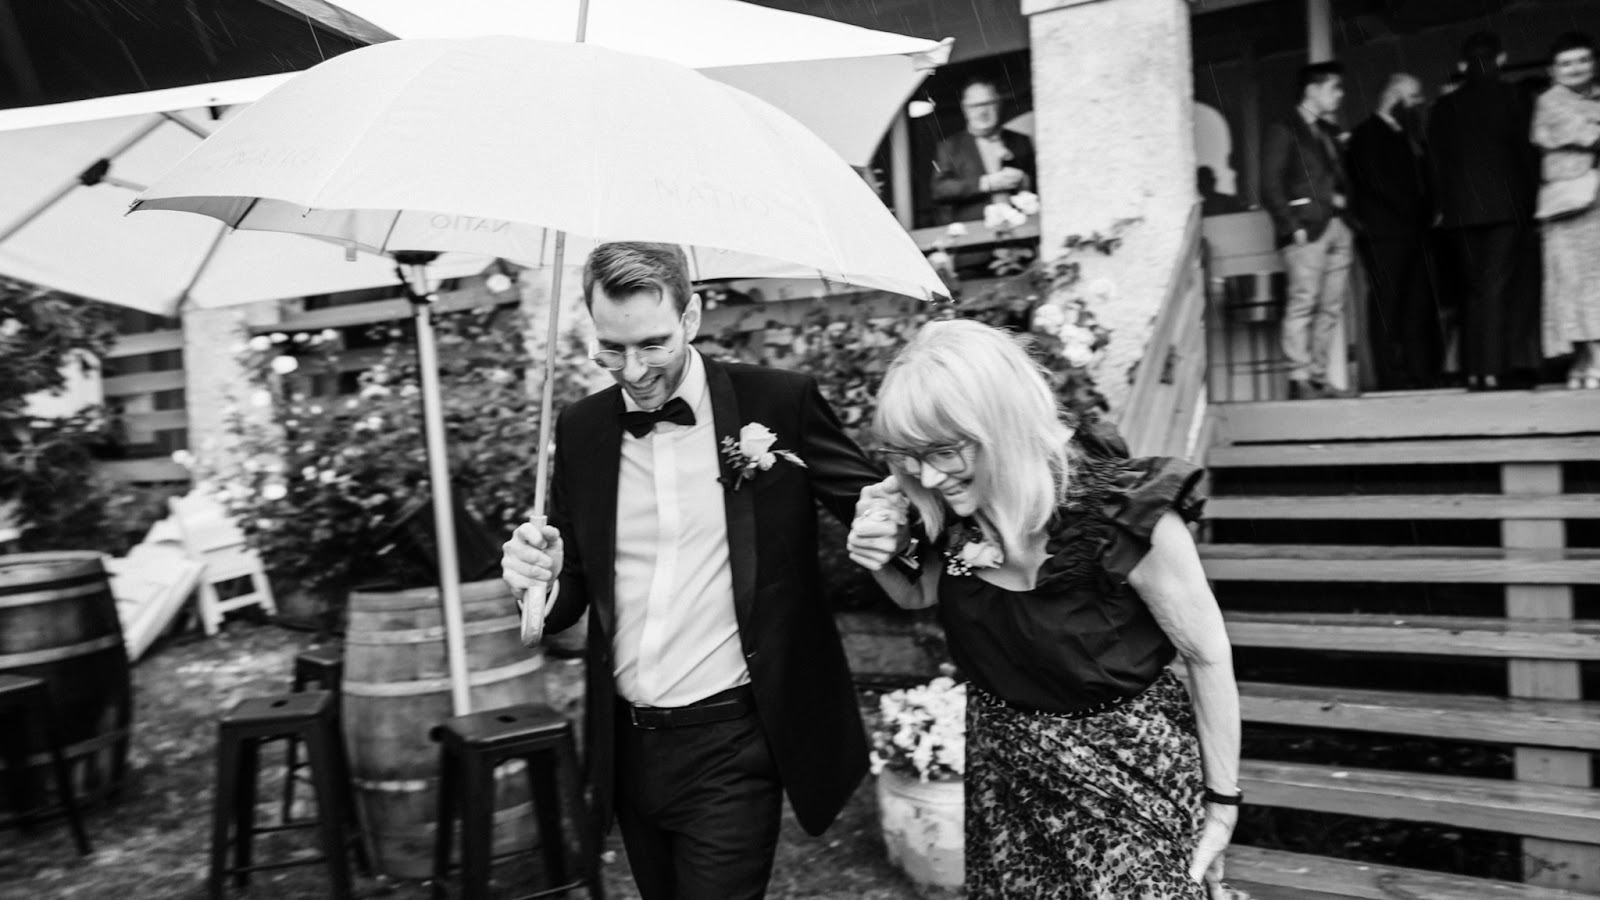 Groom walking his mum to his ceremony captured with a narrative-style wedding photography